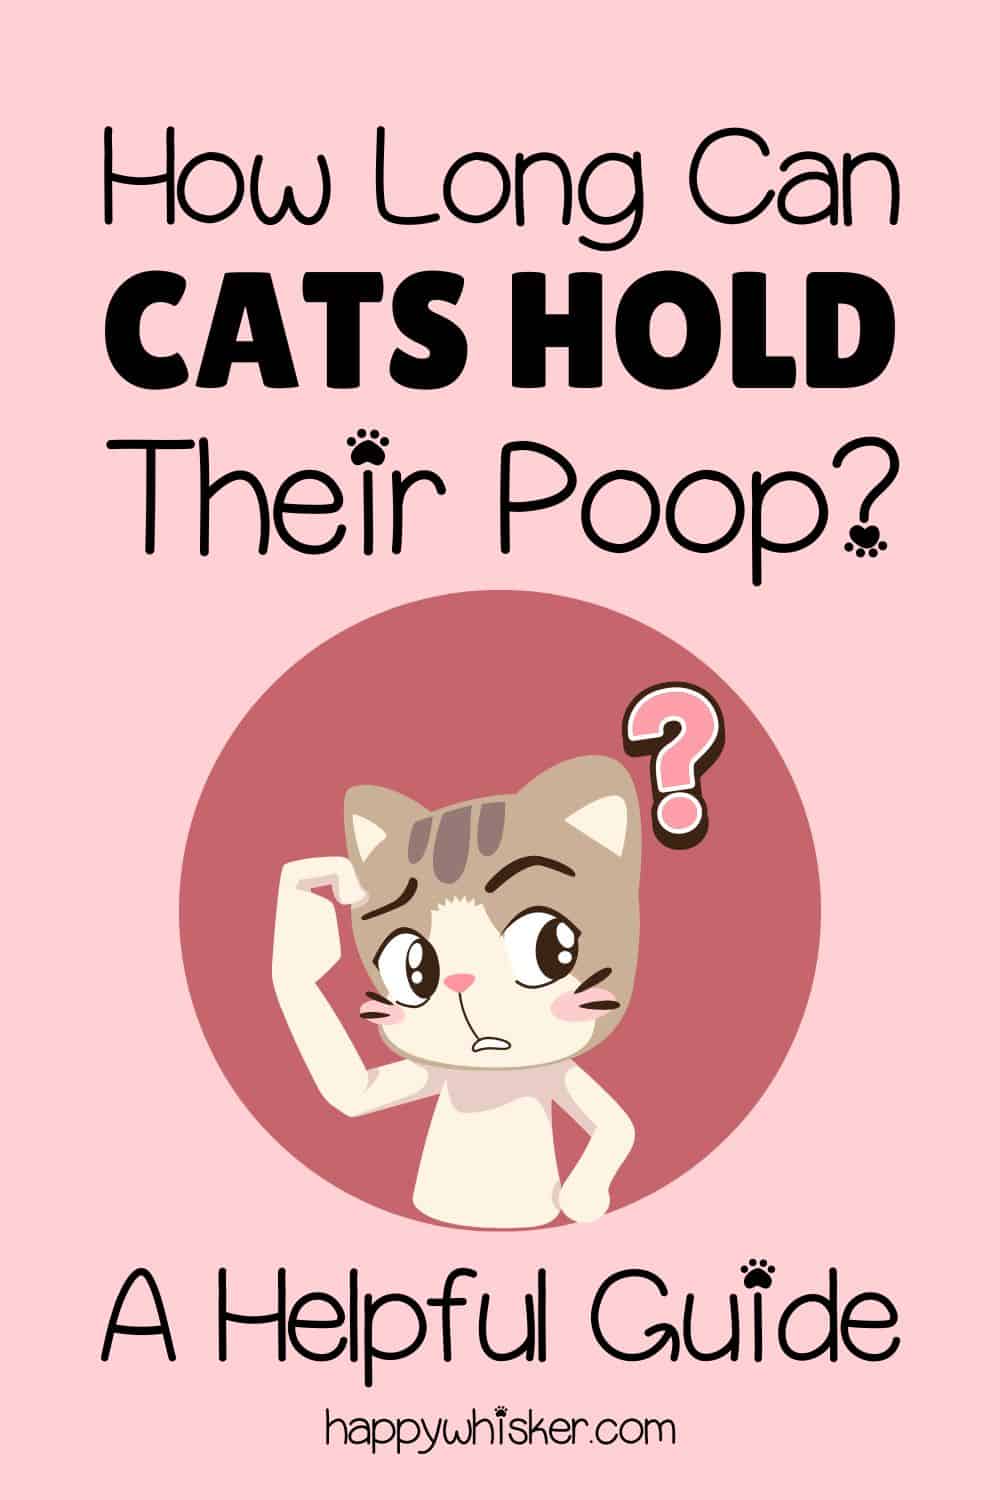 How Long Can Cats Hold Their Poop A Helpful Guide Pinterest